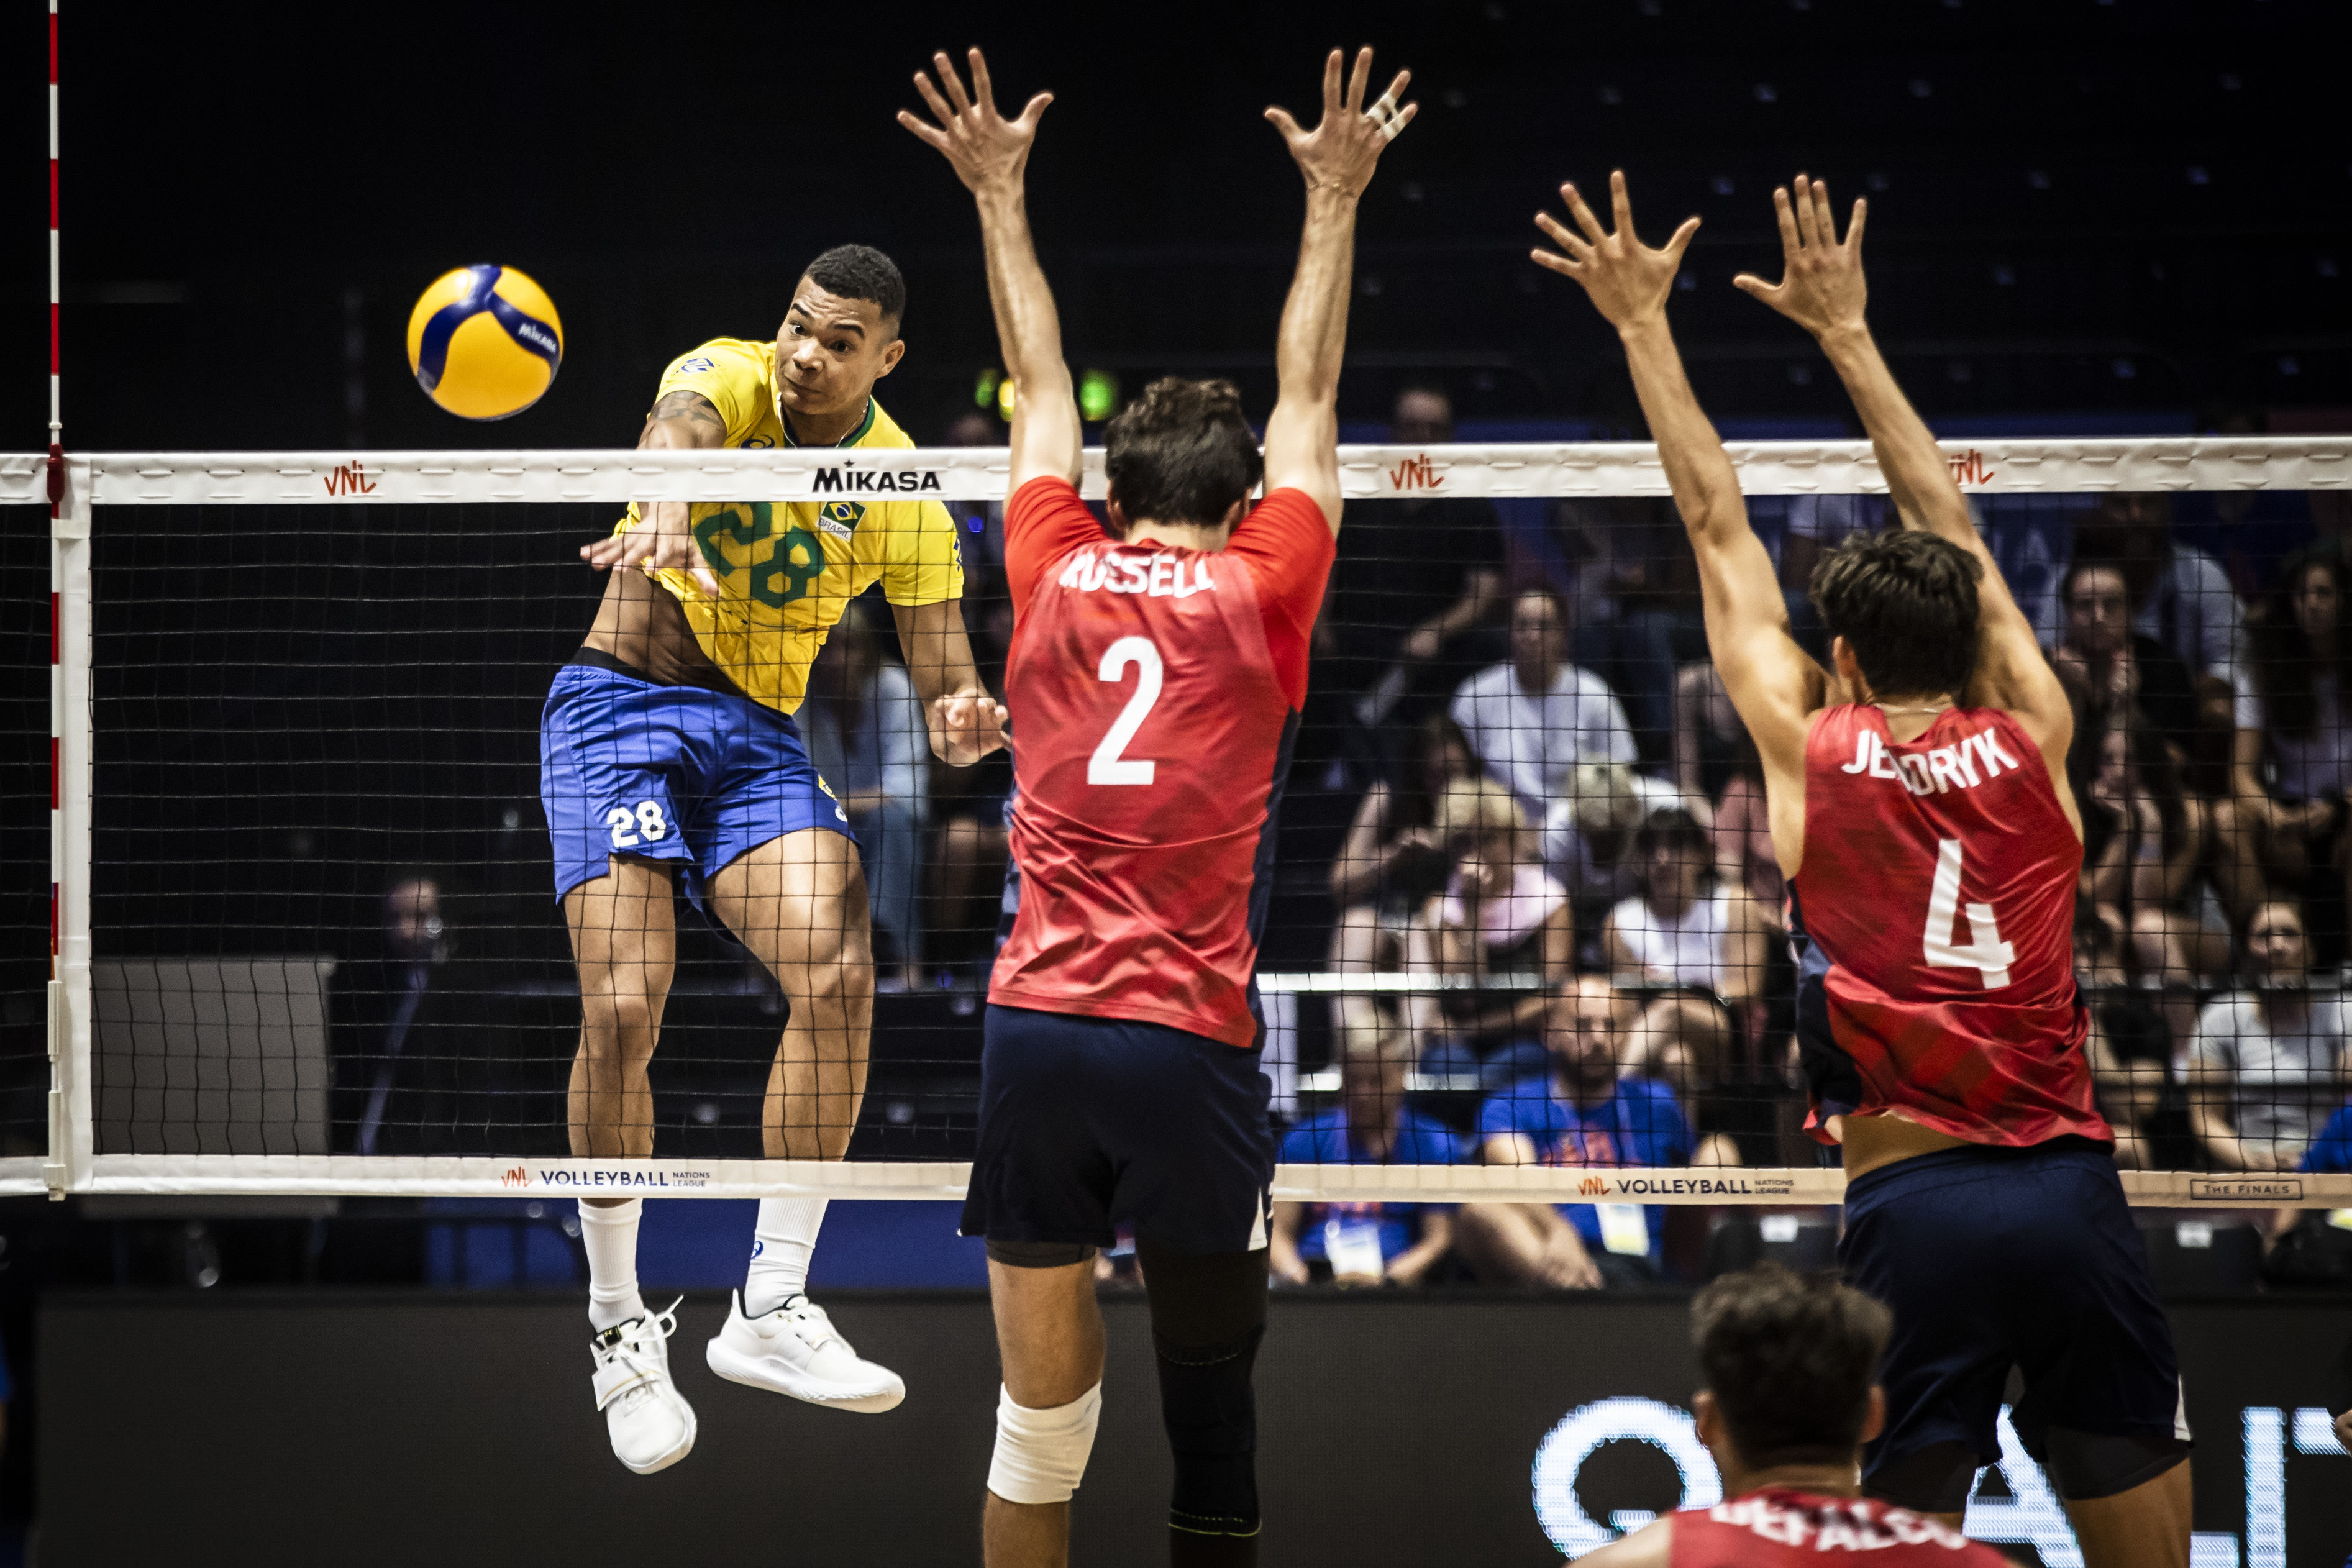 First six athletes on Brazil’s VNL squad announced | volleyballworld.com